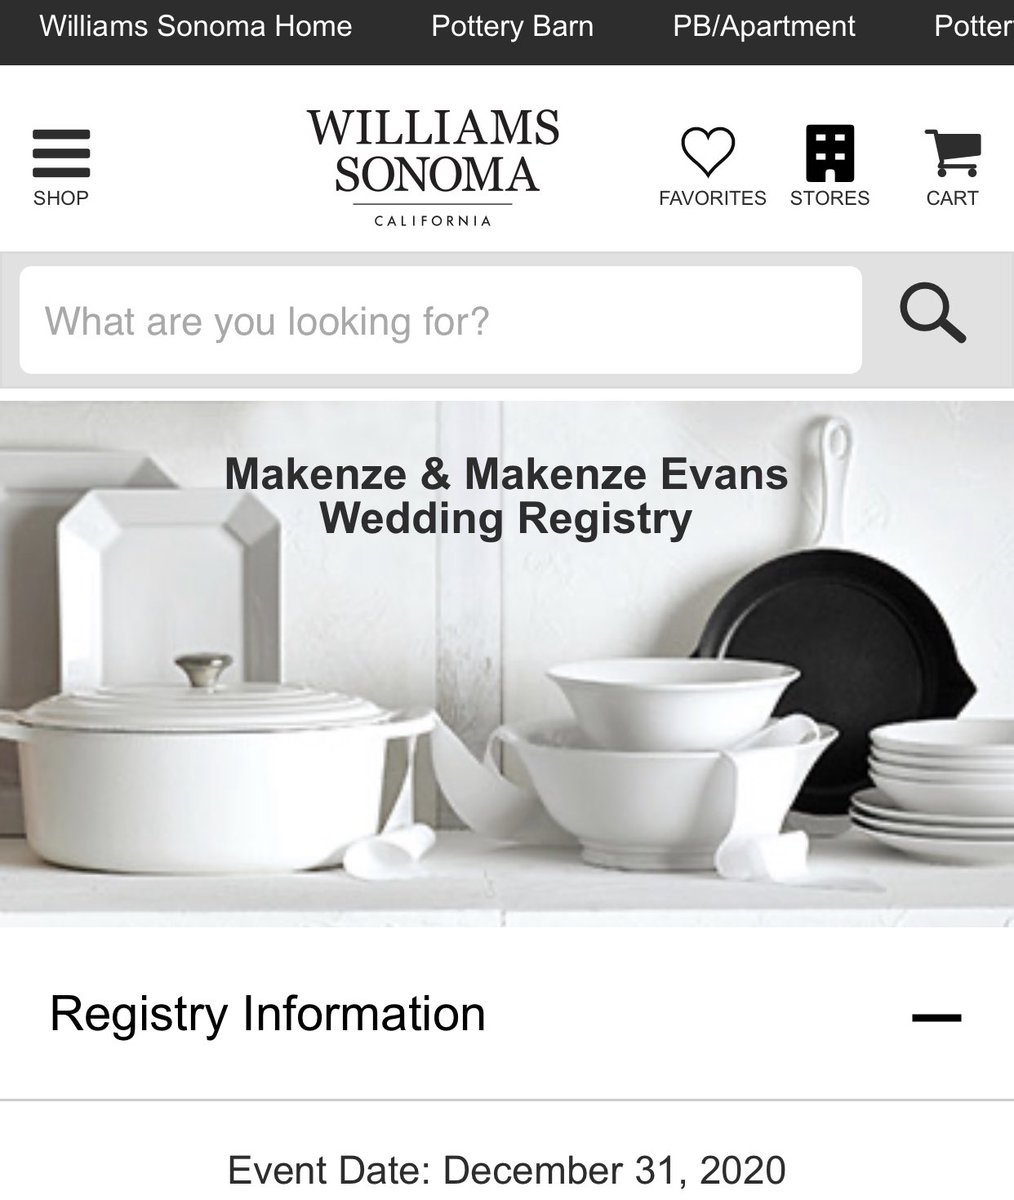 According to wedding registries, the couple was supposed to be married on December 31, 2020.